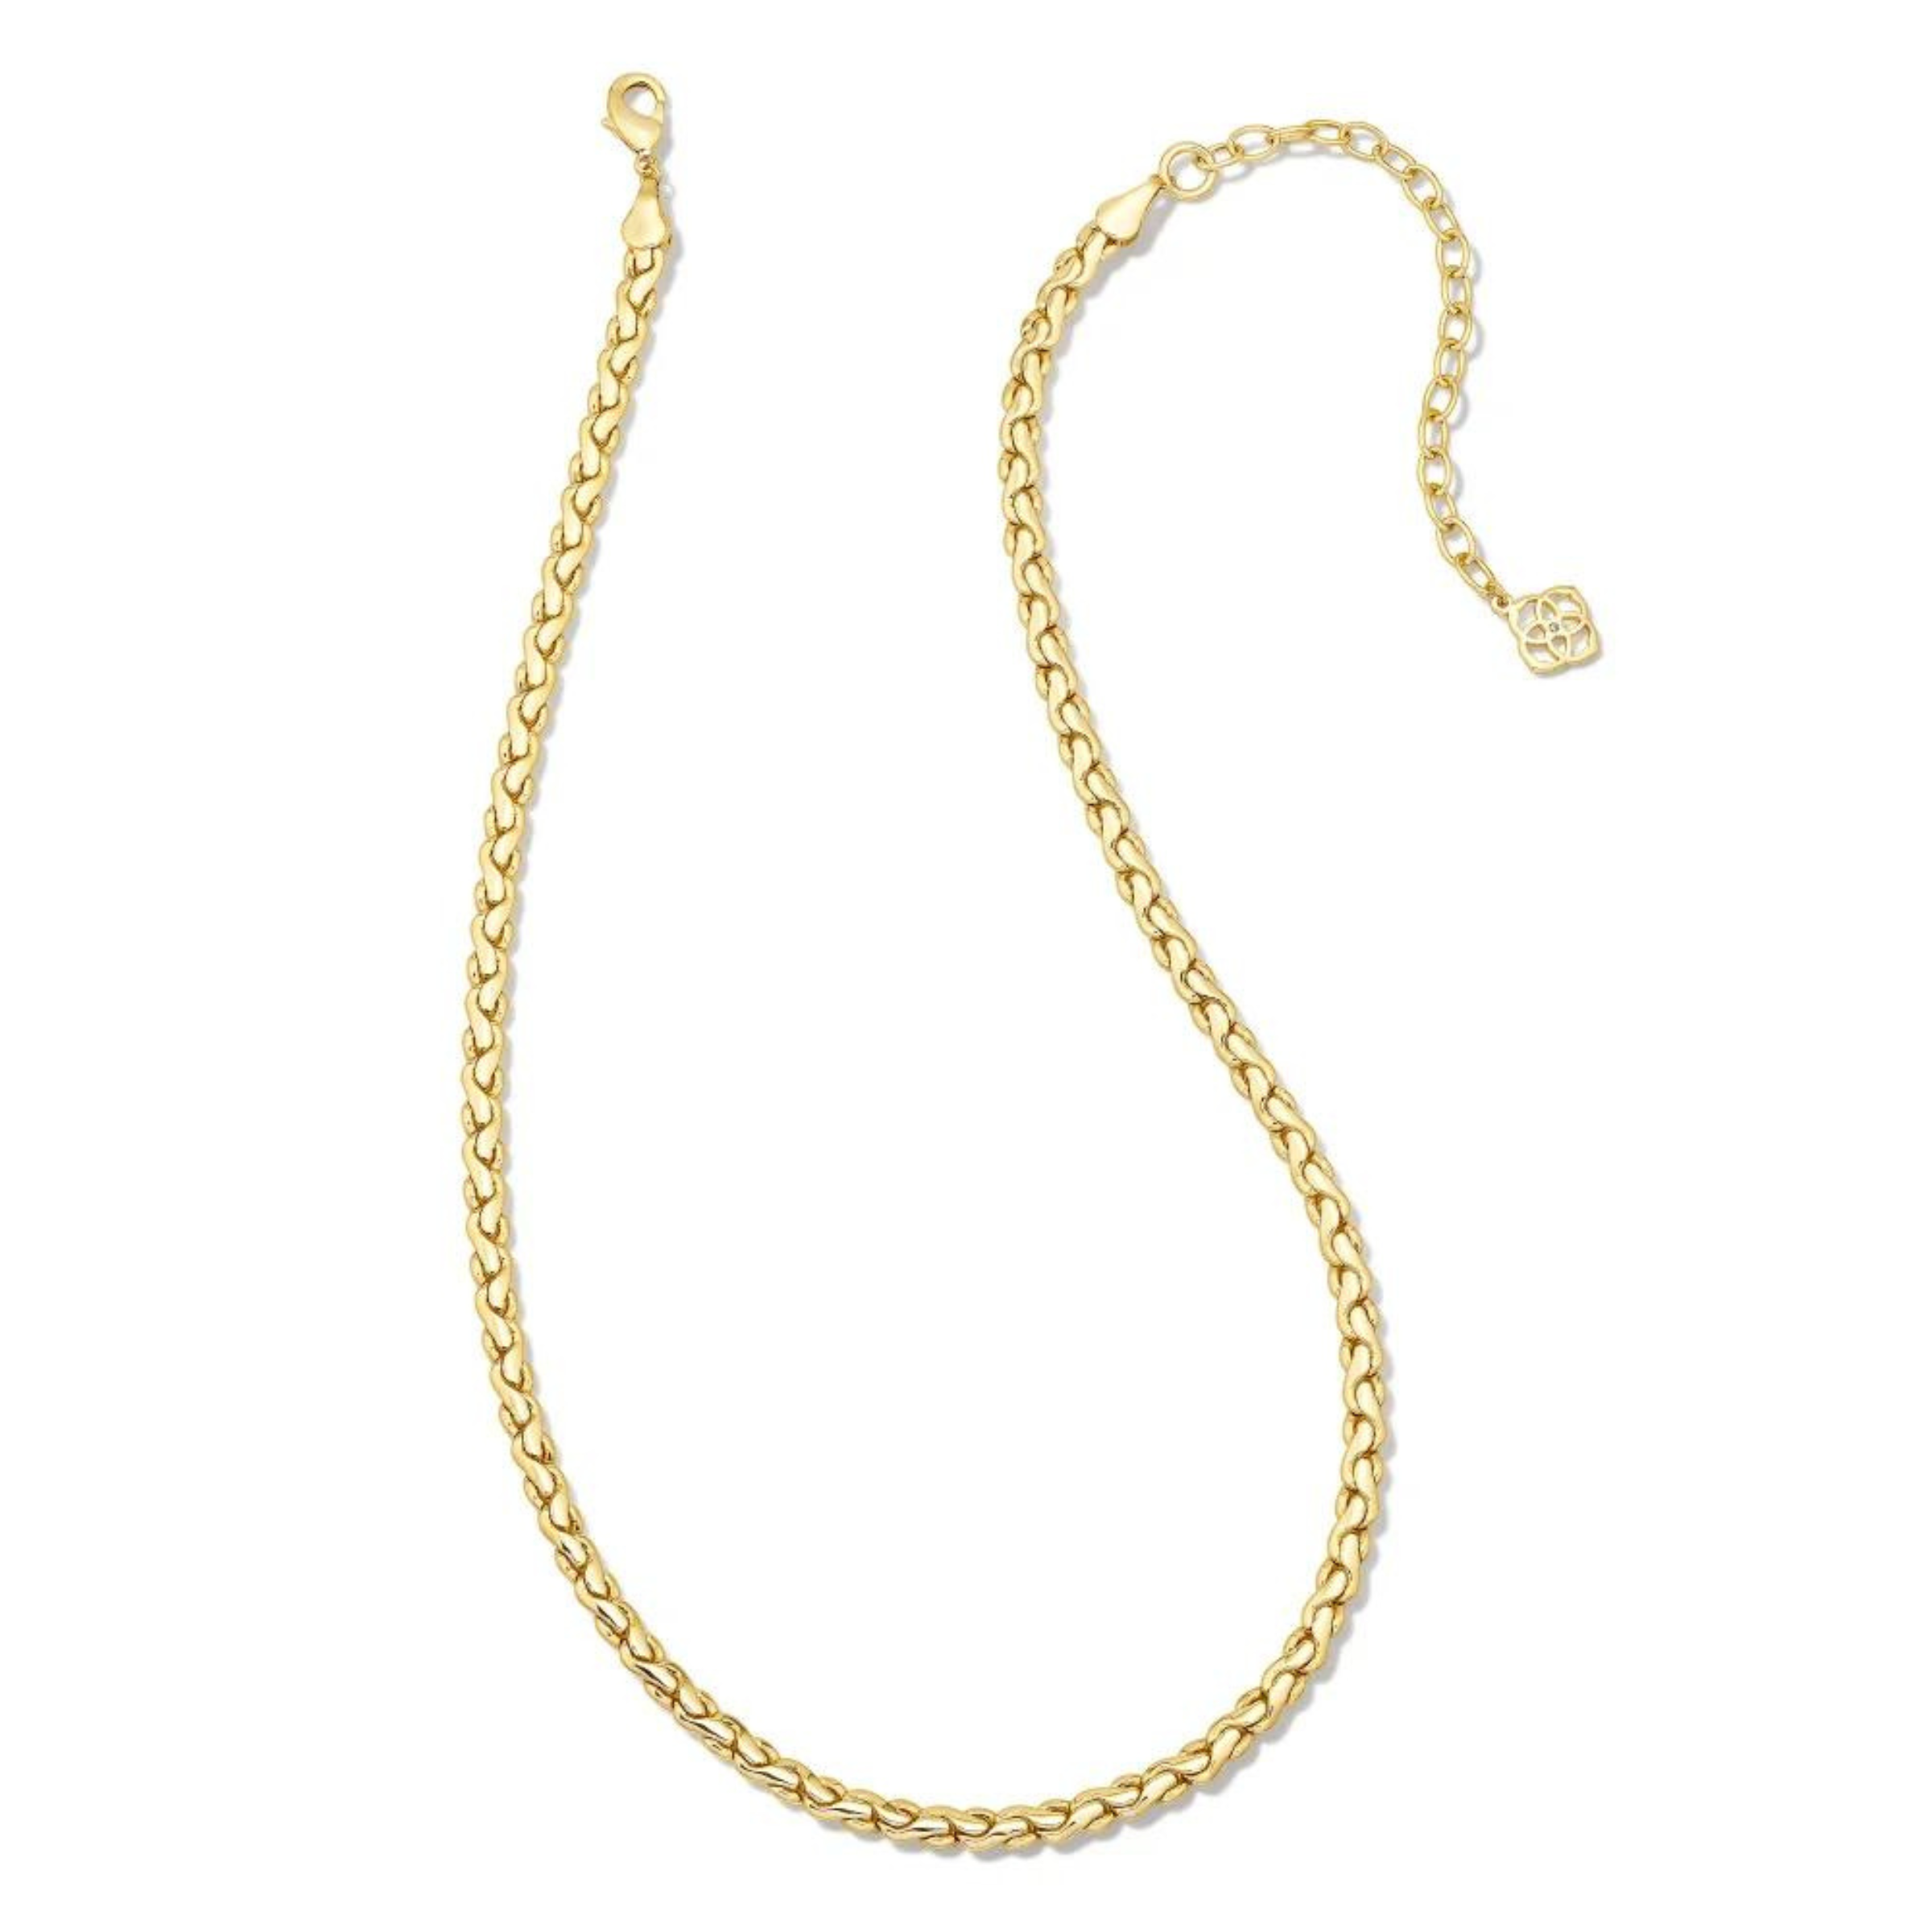 Adjustable chain necklace in gold. This necklace is pictured on a white background. 